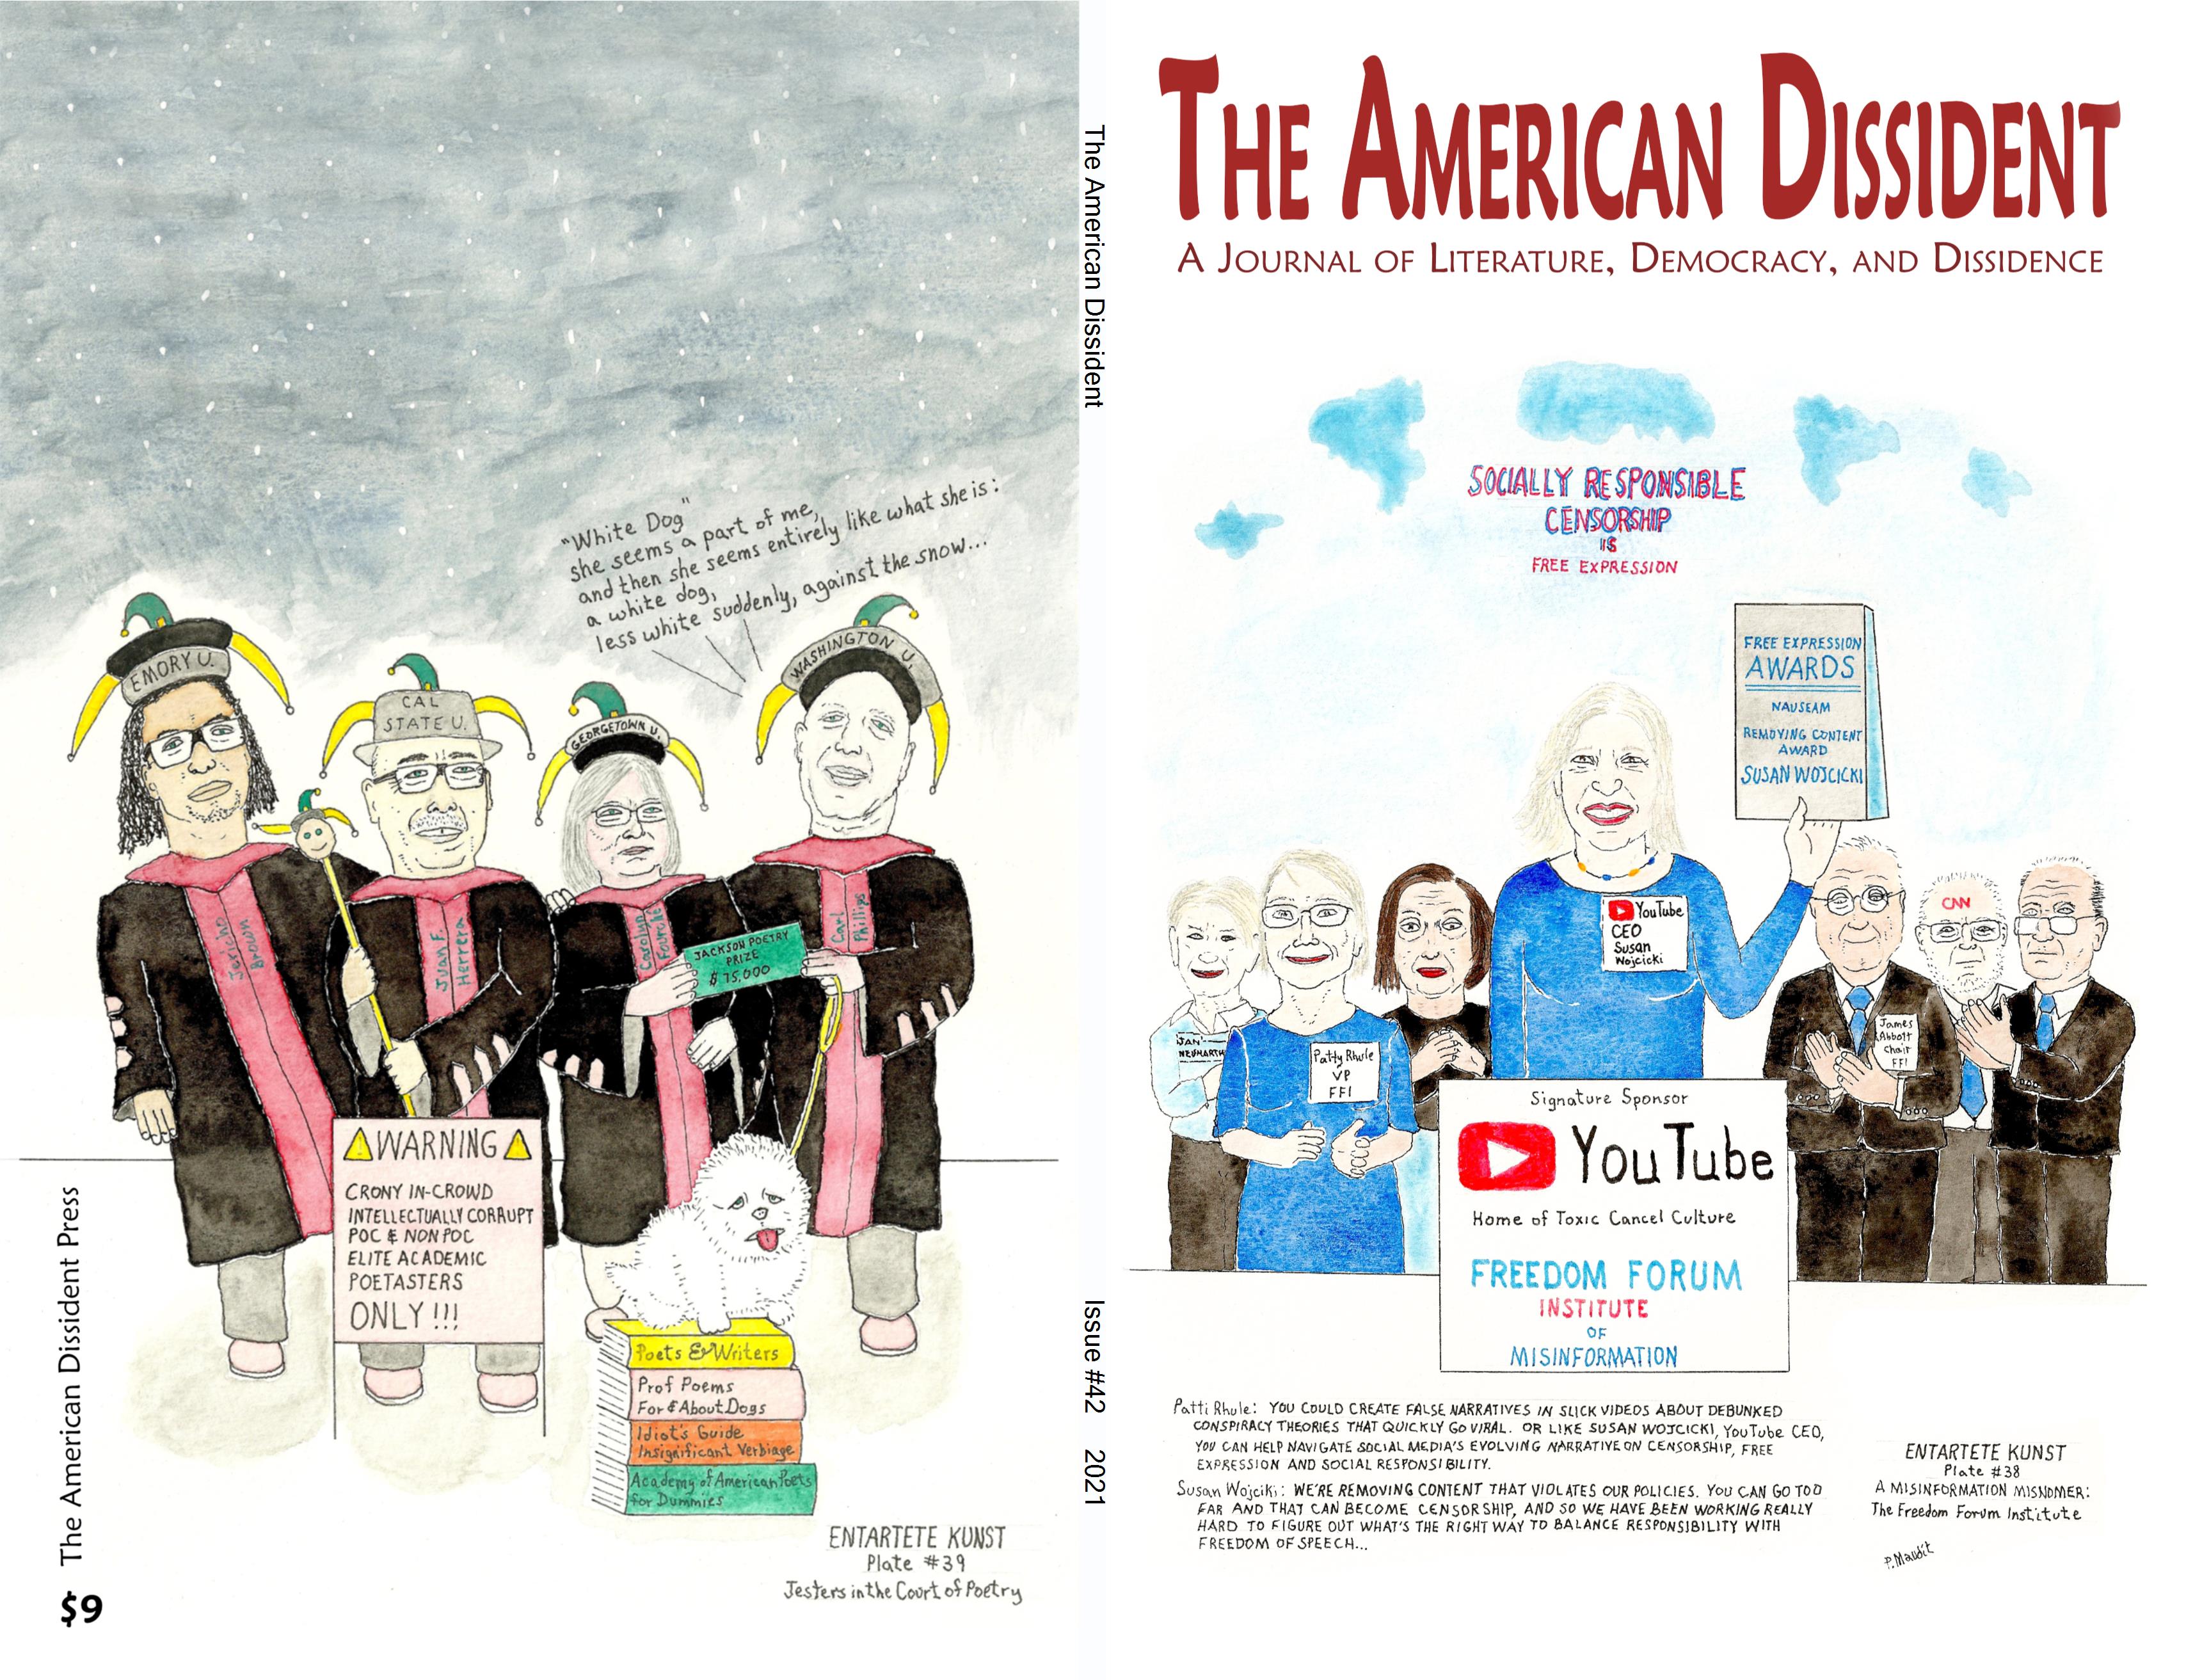 The American Dissident #42 cover image